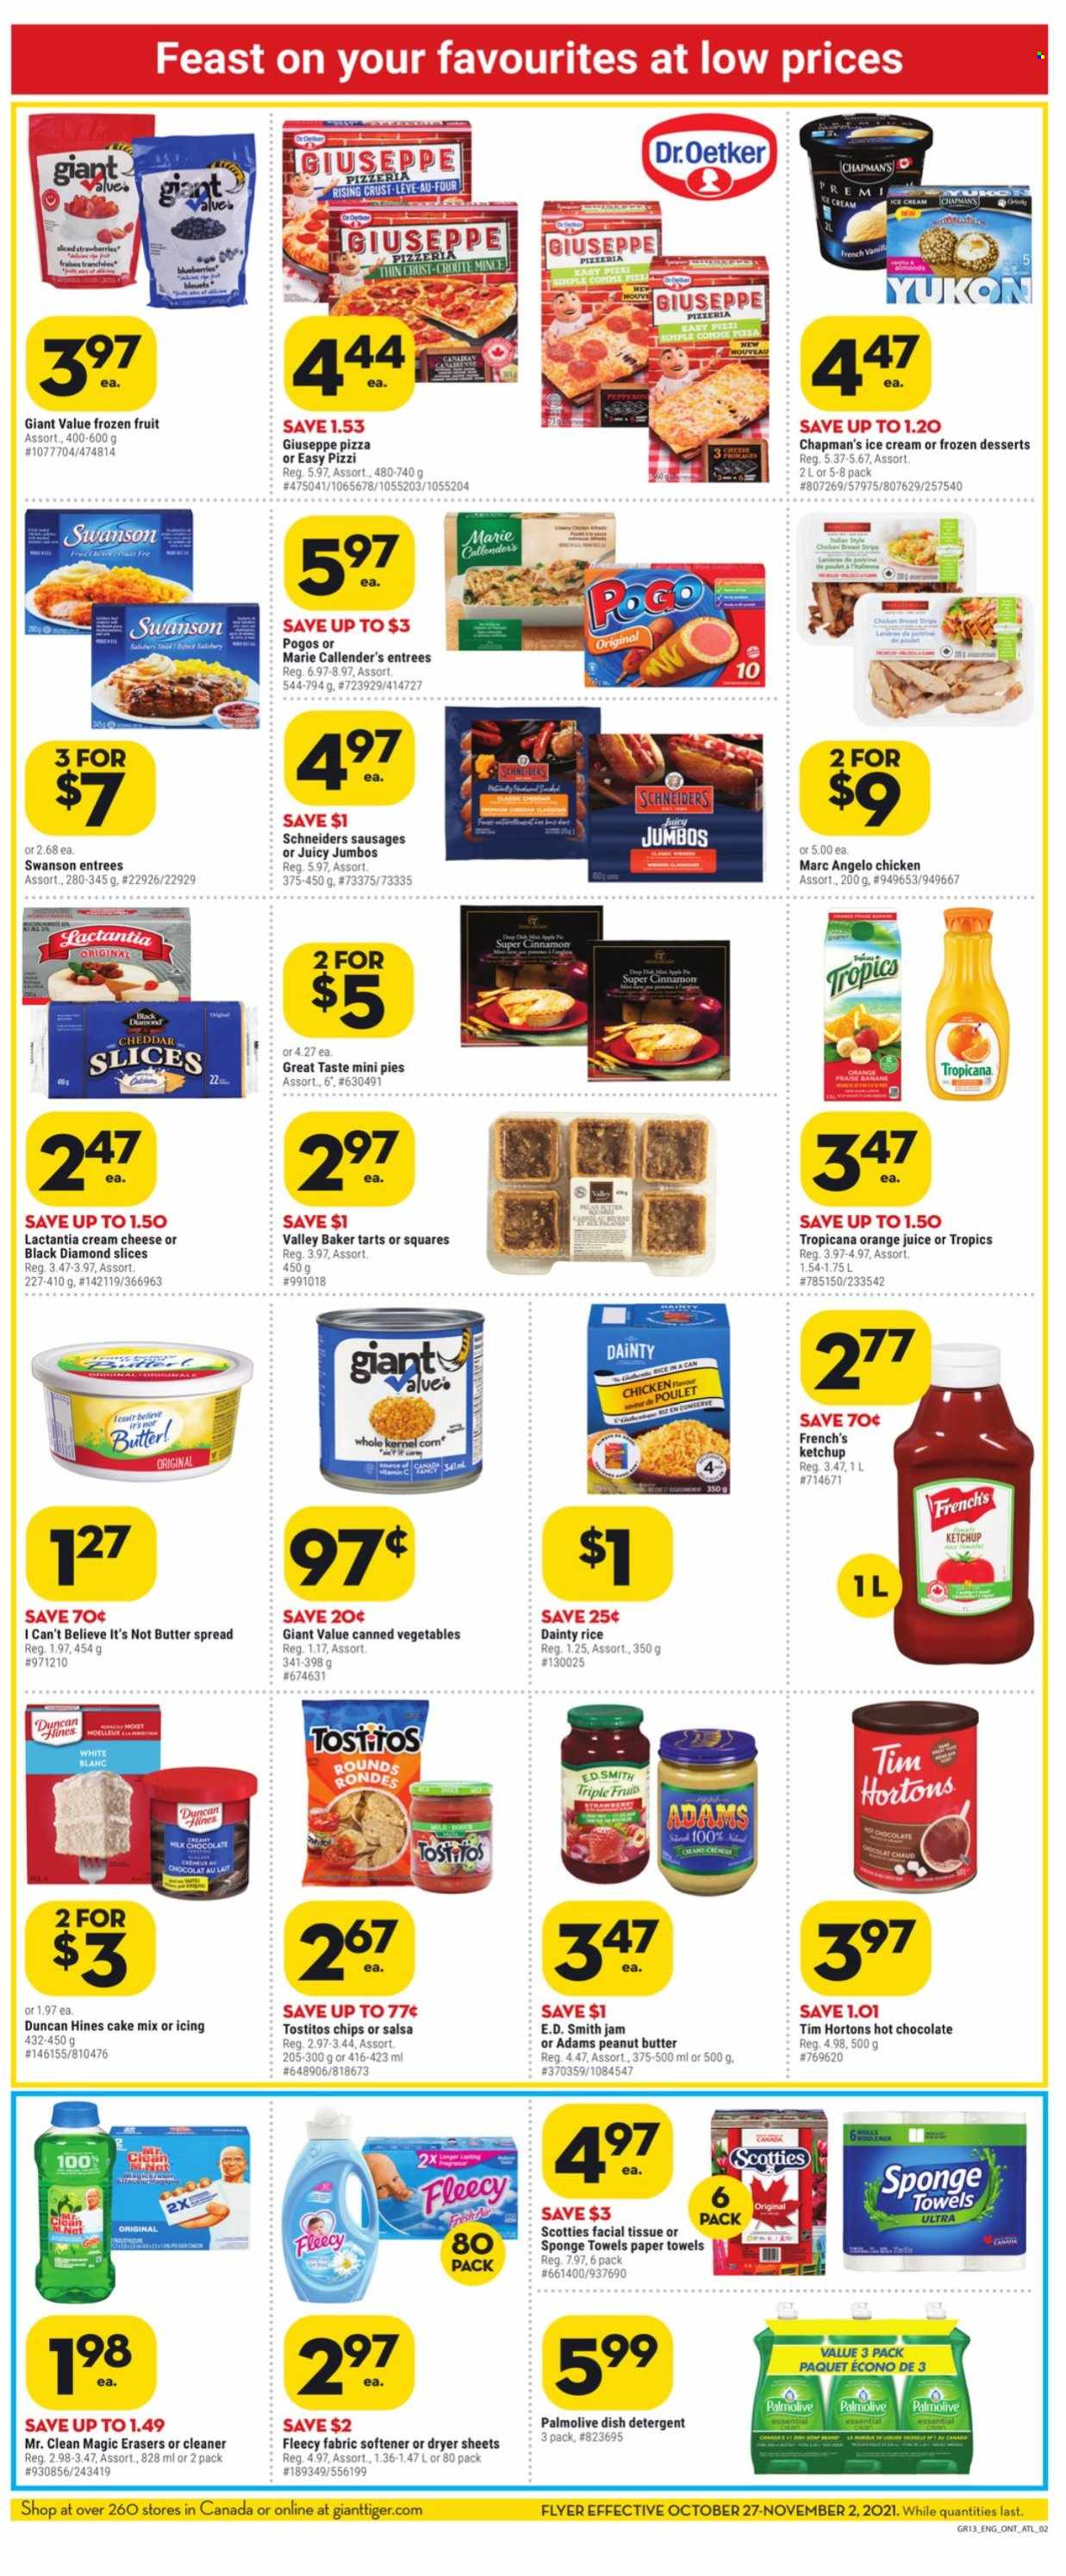 thumbnail - Giant Tiger Flyer - October 27, 2021 - November 02, 2021 - Sales products - cake mix, corn, pizza, Marie Callender's, sausage, Dr. Oetker, I Can't Believe It's Not Butter, ice cream, Tostitos, canned vegetables, rice, cinnamon, salsa, fruit jam, peanut butter, orange juice, juice, hot chocolate, tissues, kitchen towels, paper towels, cleaner, fabric softener, dryer sheets, Palmolive, sponge, detergent, ketchup. Page 2.